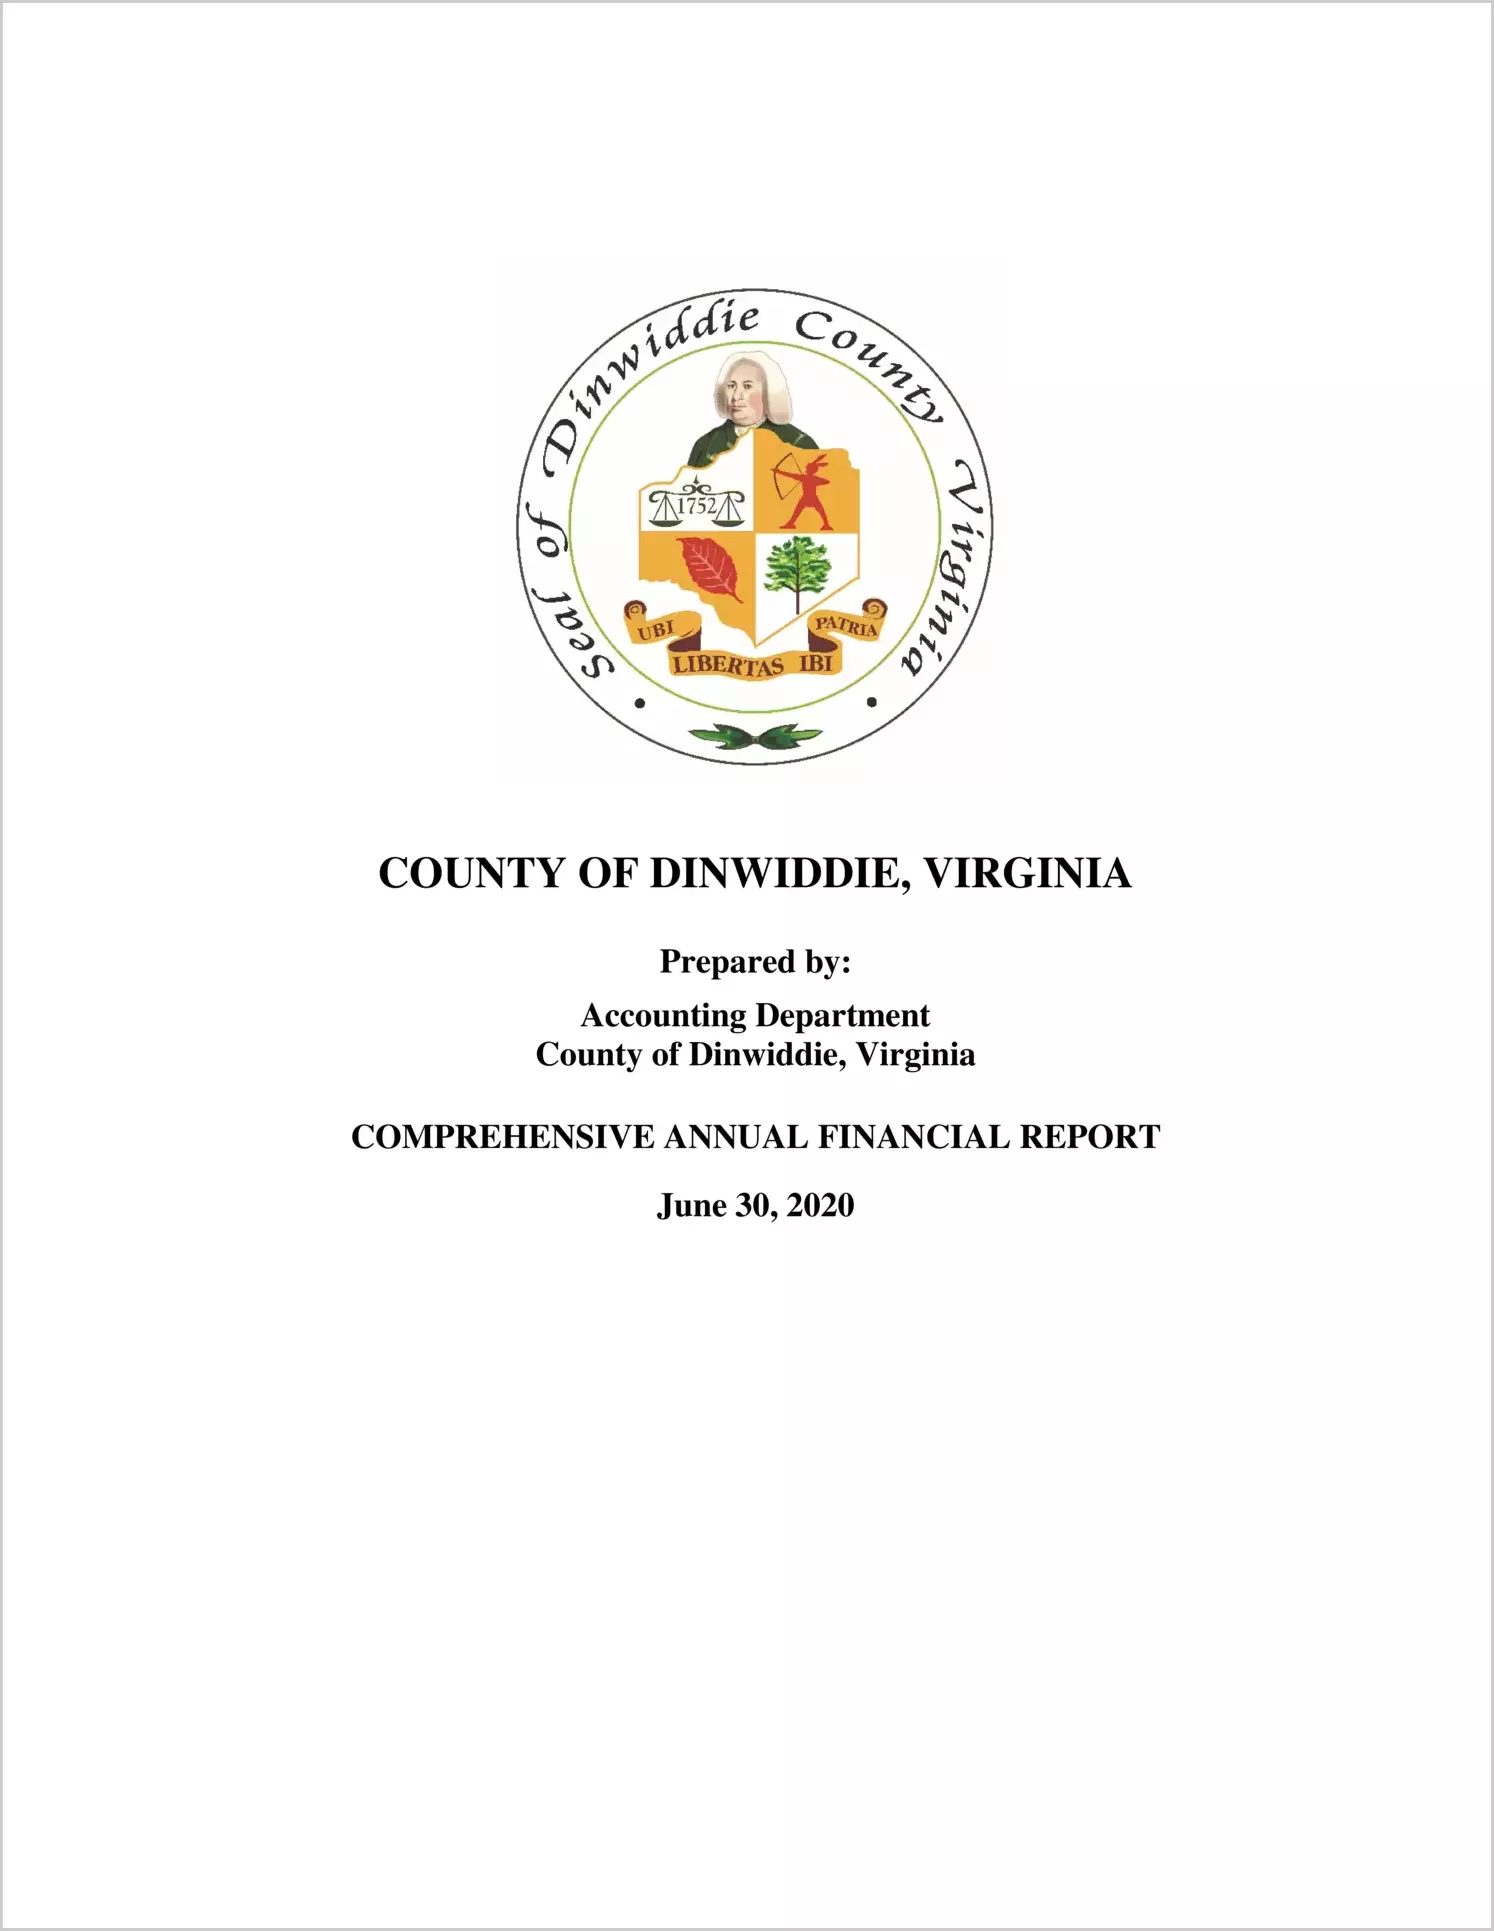 2020 Annual Financial Report for County of Dinwiddie